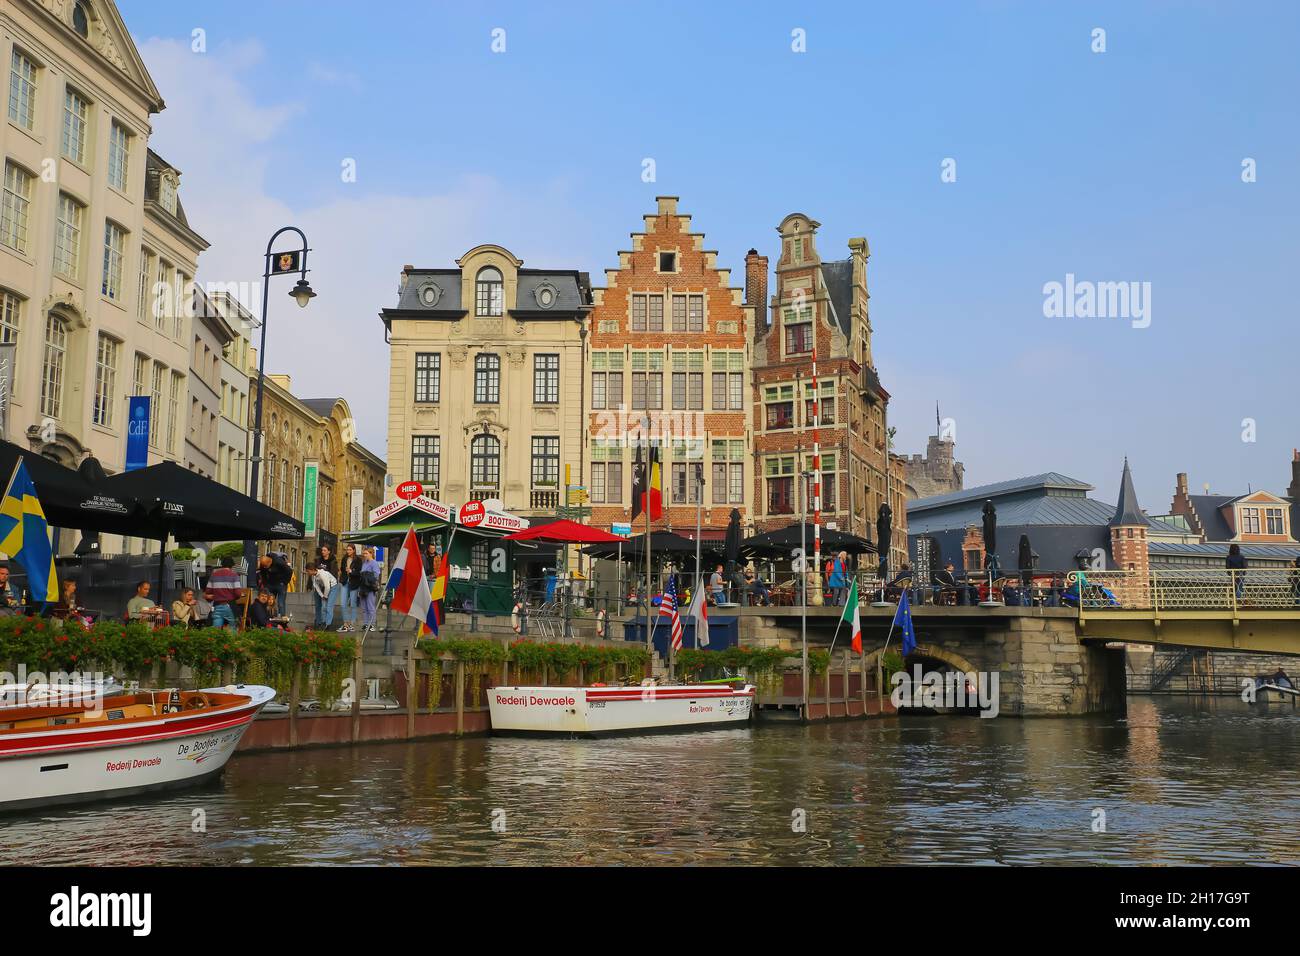 Gent (Grasbrug), Belgium - October 9. 2021: View over water canal on exterior cafe, sightseeing boat tour pier, medival buildings and bridge in the mo Stock Photo